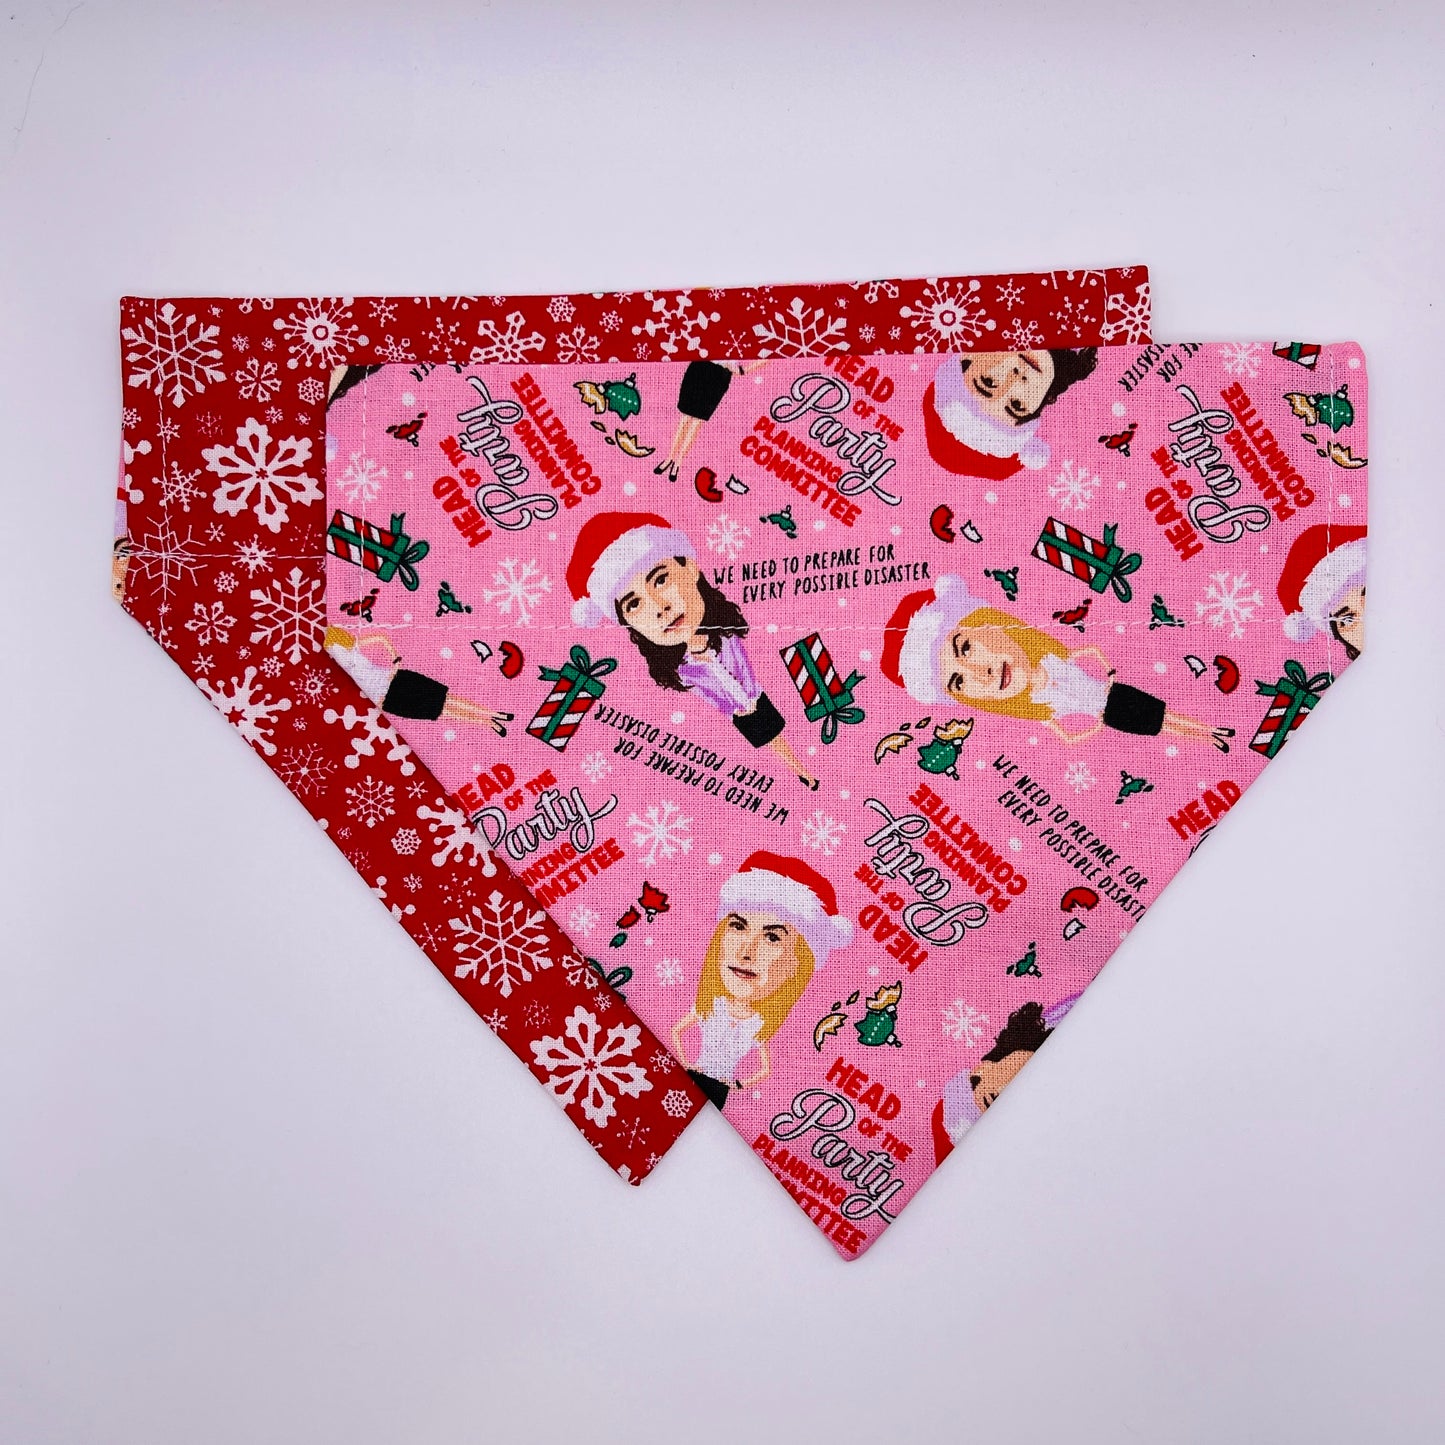 Party Planning Committee Bandana